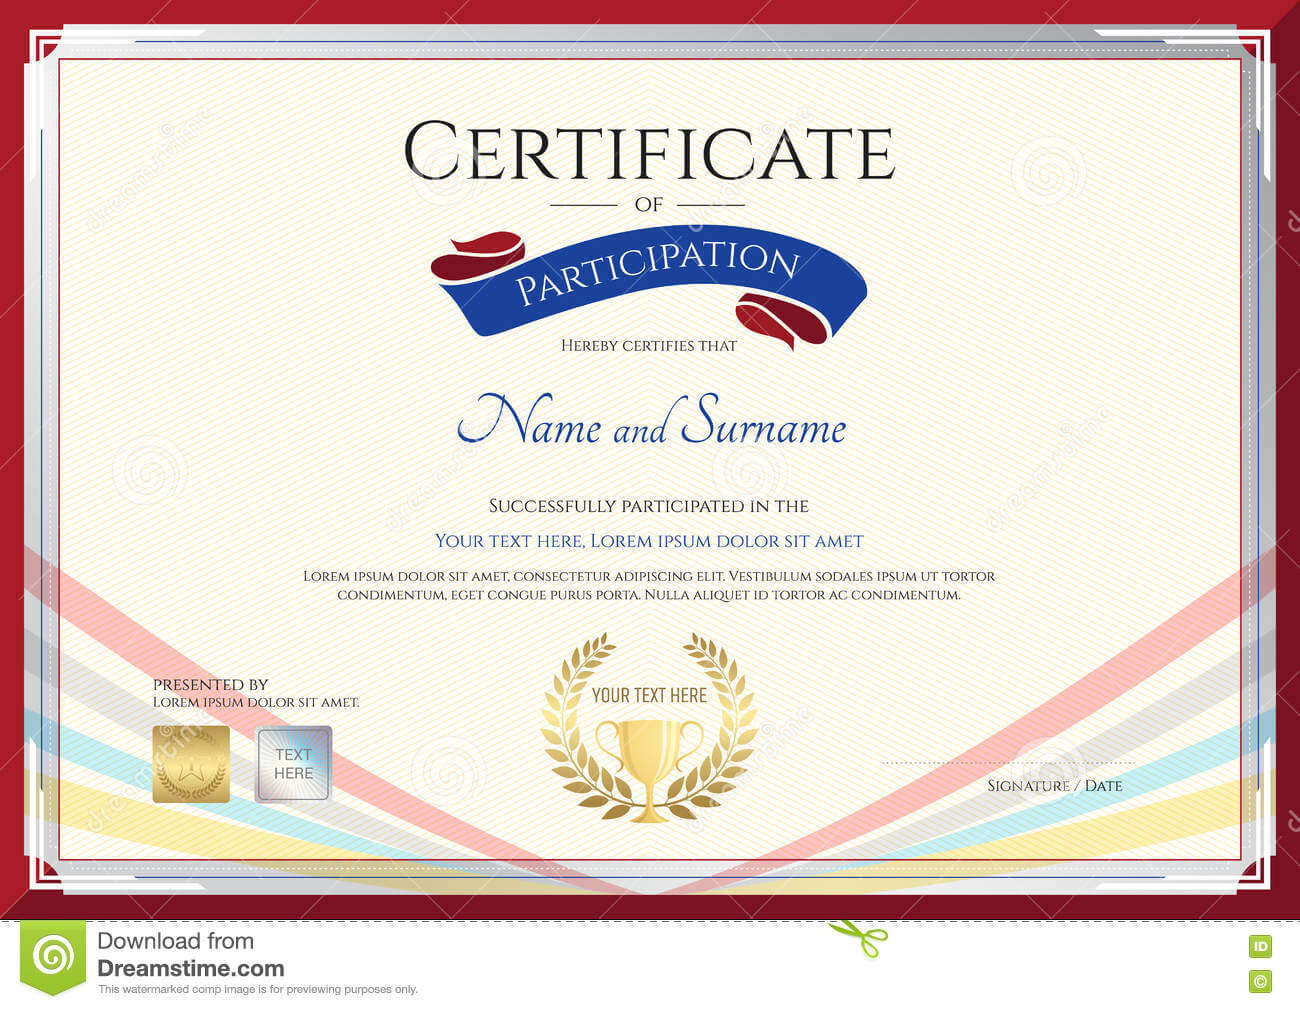 Certificate Template For Achievement, Appreciation Or Within Sample Certificate Of Participation Template